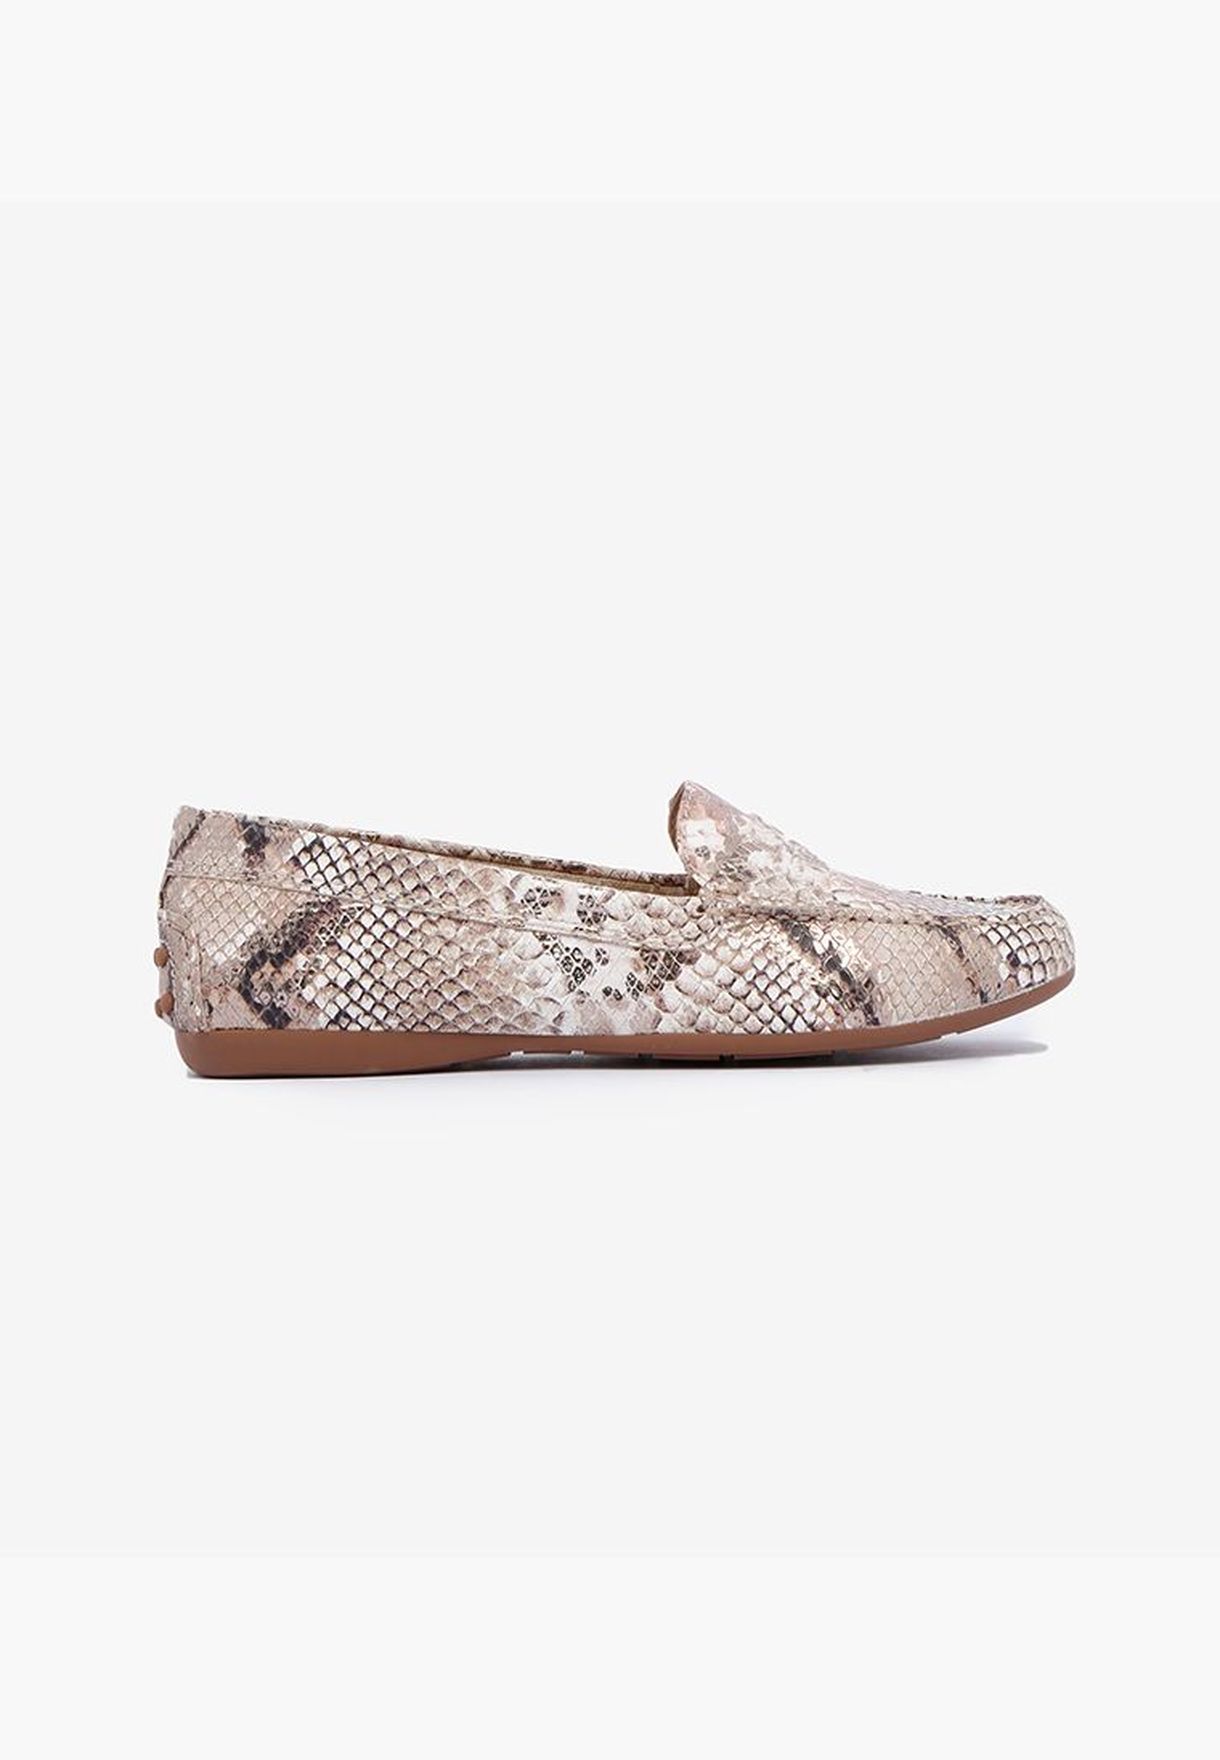 womens snake print loafers